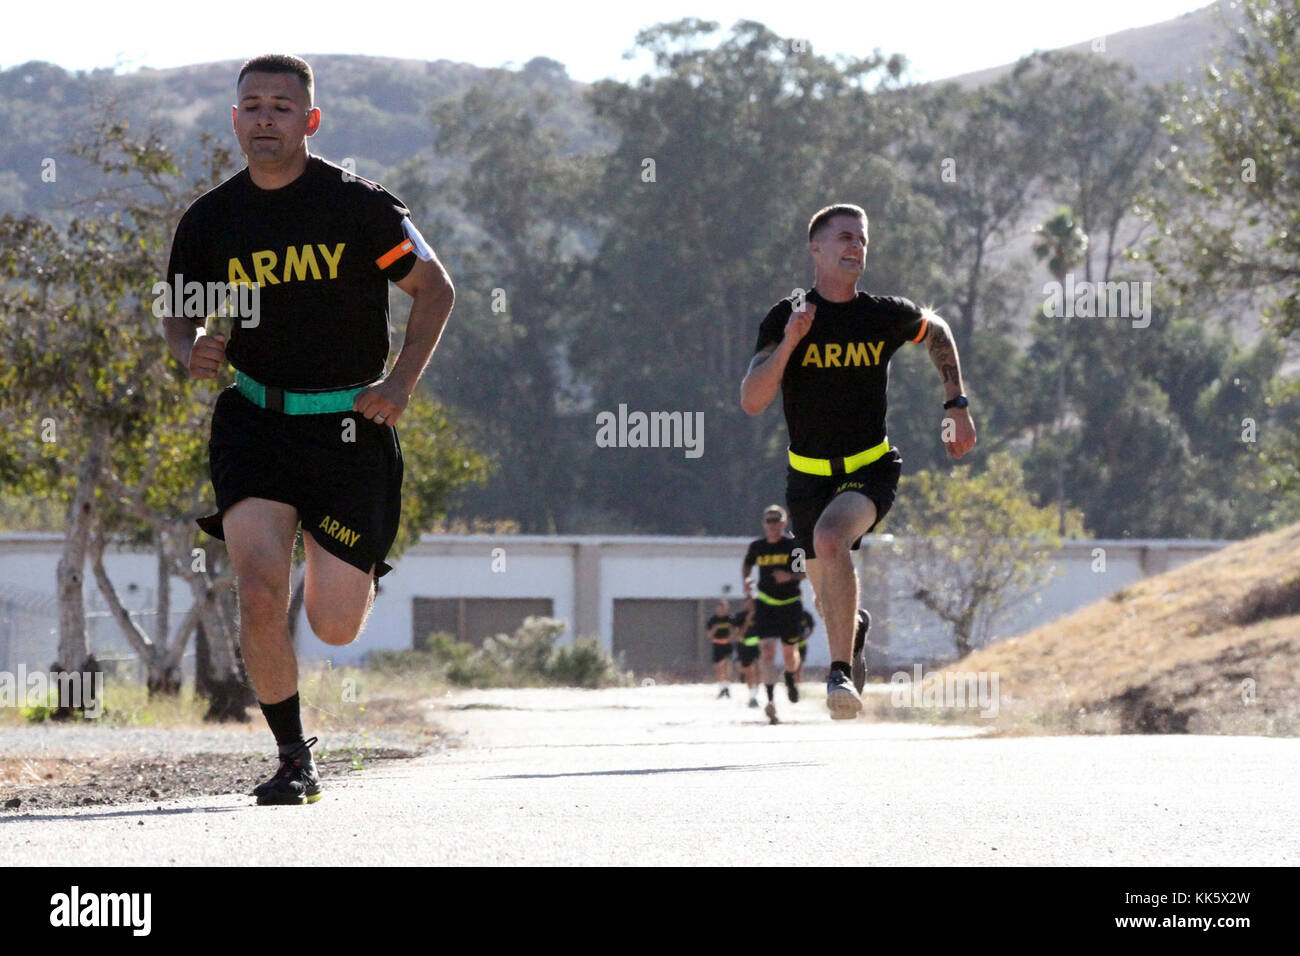 Sgt. George Ruiz, left, of the 49th Personnel Support Company, 115th Regional Support Group, California Army National Guard, battles Spc. Devon Witt to the finish line of the 2-mile run of the Army Physical Fitness Test Nov. 5 during the 2017-18 Best Warrior Competition at Camp San Luis Obispo, California. (Army National Guard photo by Staff Sgt. Eddie Siguenza) Stock Photo